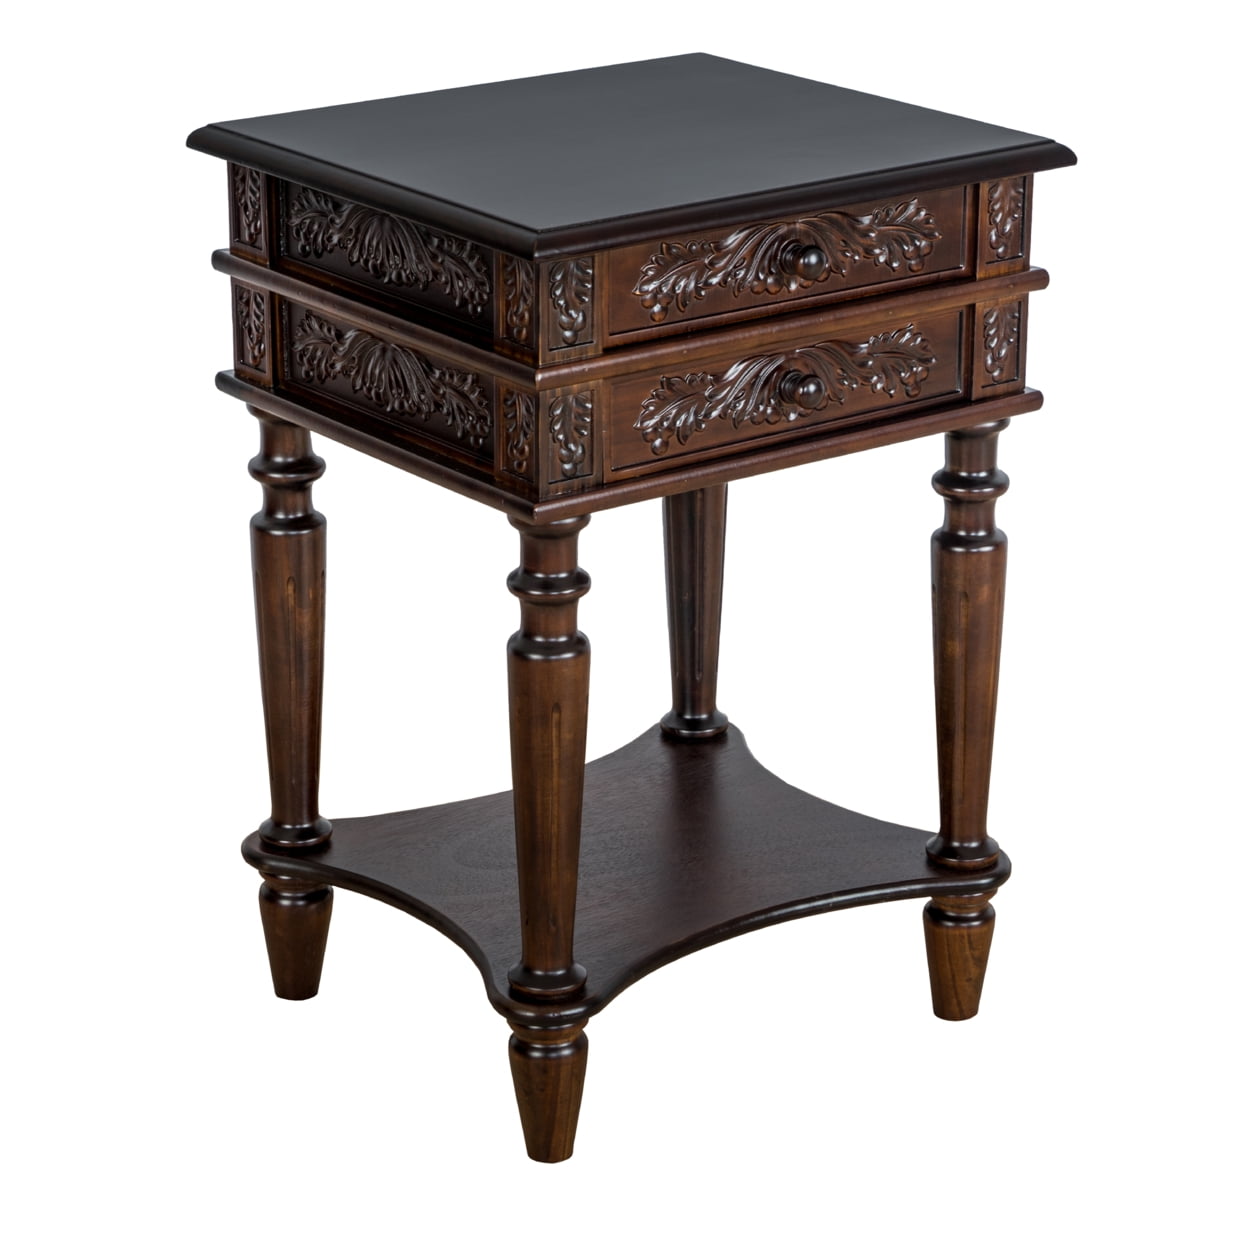 Bm210452 2 Drawer End Table With Intricate Carvings & Open Bottom Shelf, Brown